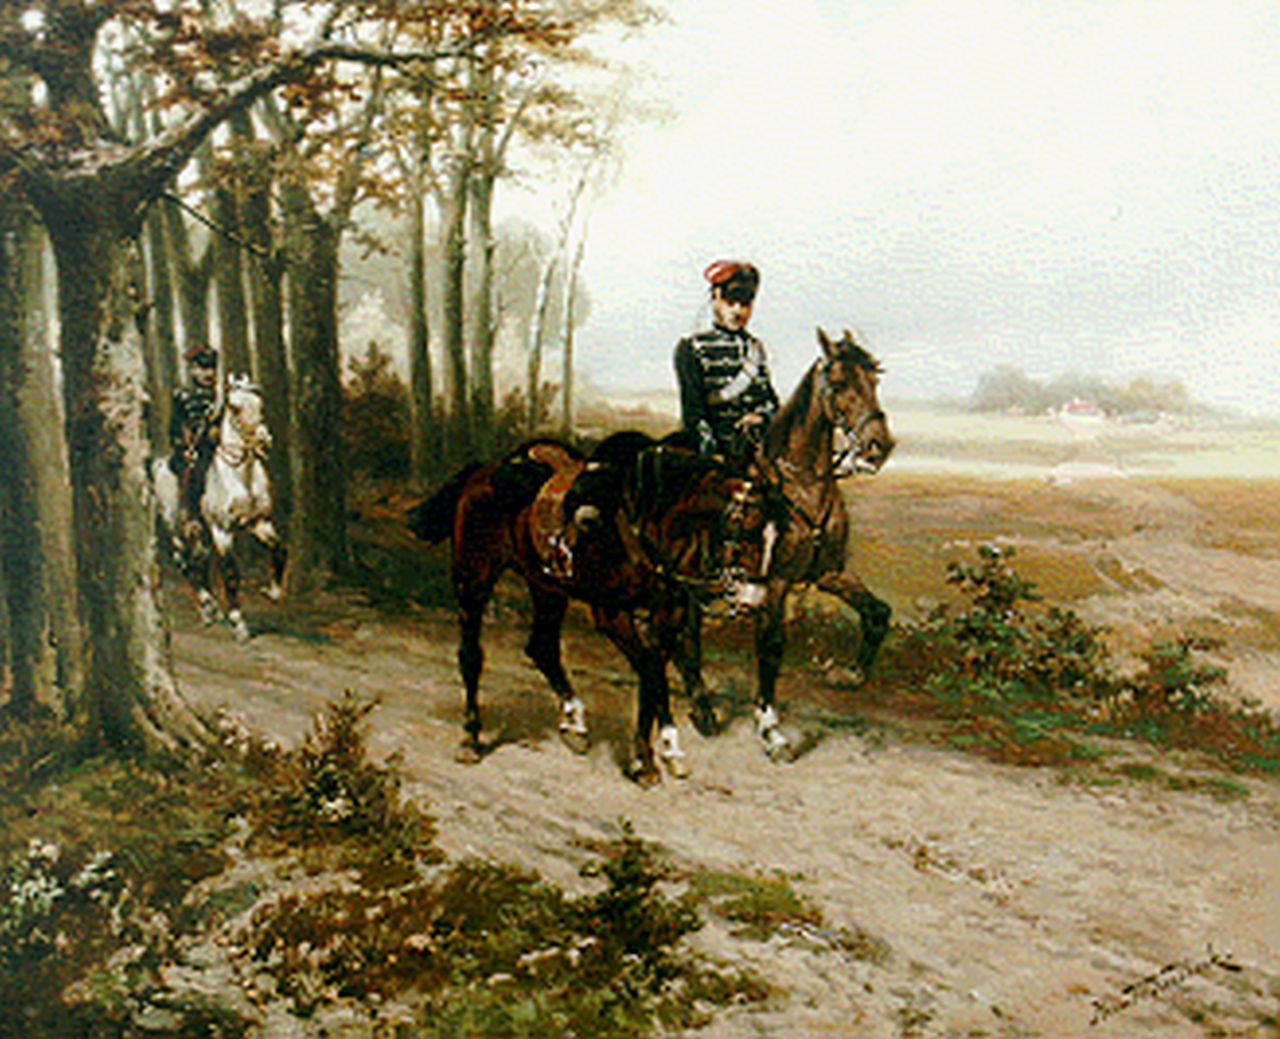 Koekkoek H.W.  | Hermanus Willem Koekkoek, Hussars and horse without rider, oil on canvas 43.0 x 53.6 cm, signed l.r.